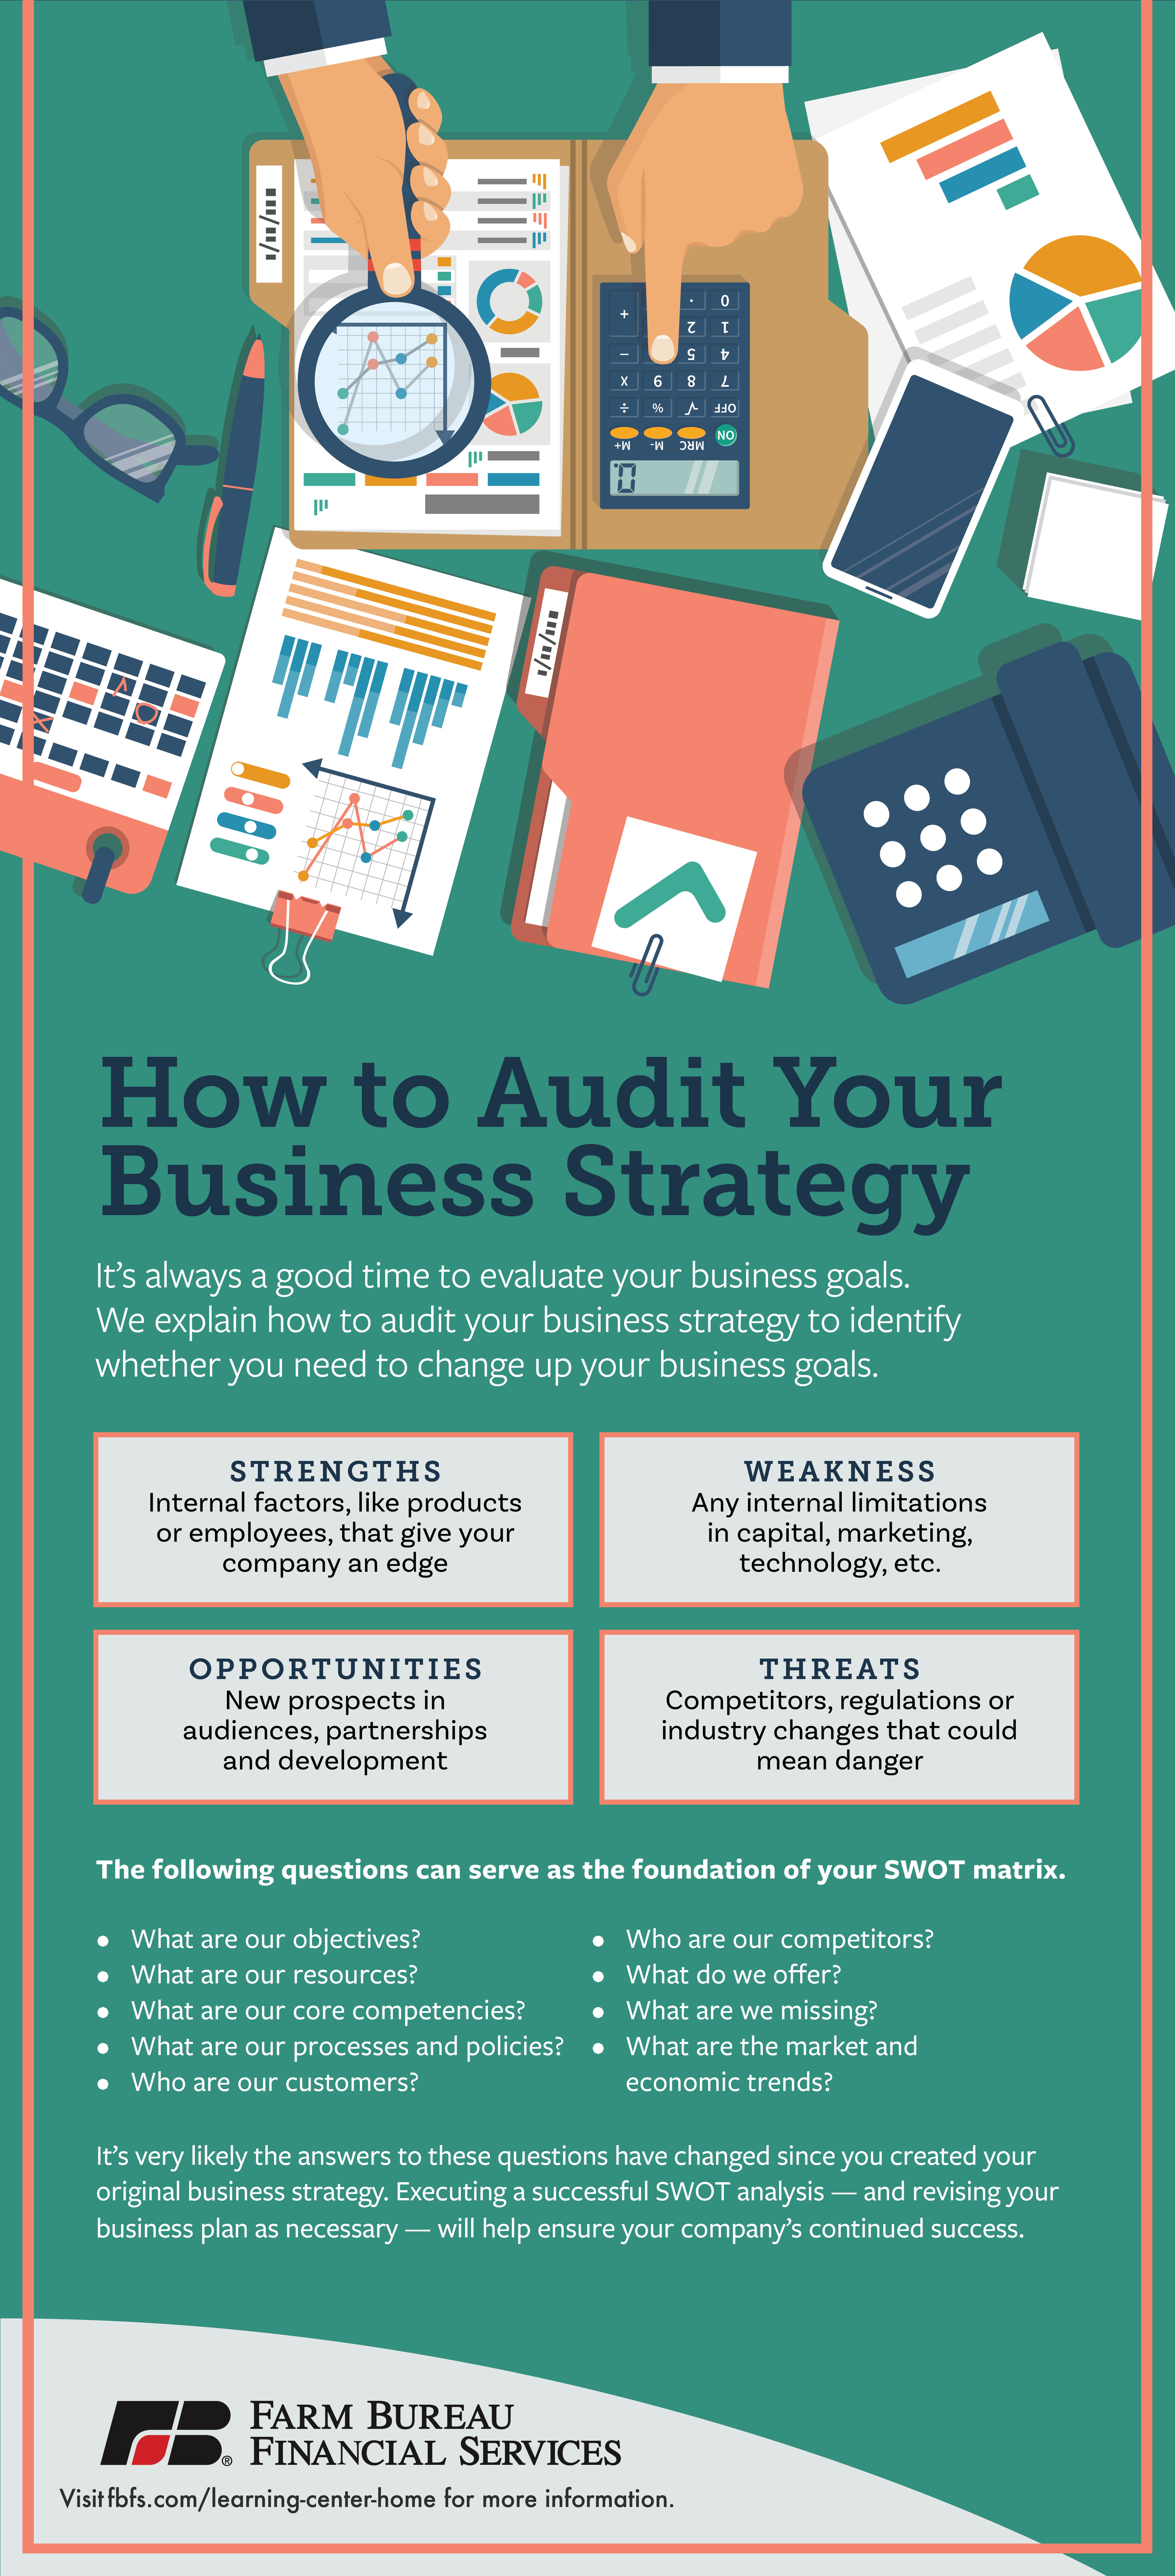 How to Audit Your Business Strategy